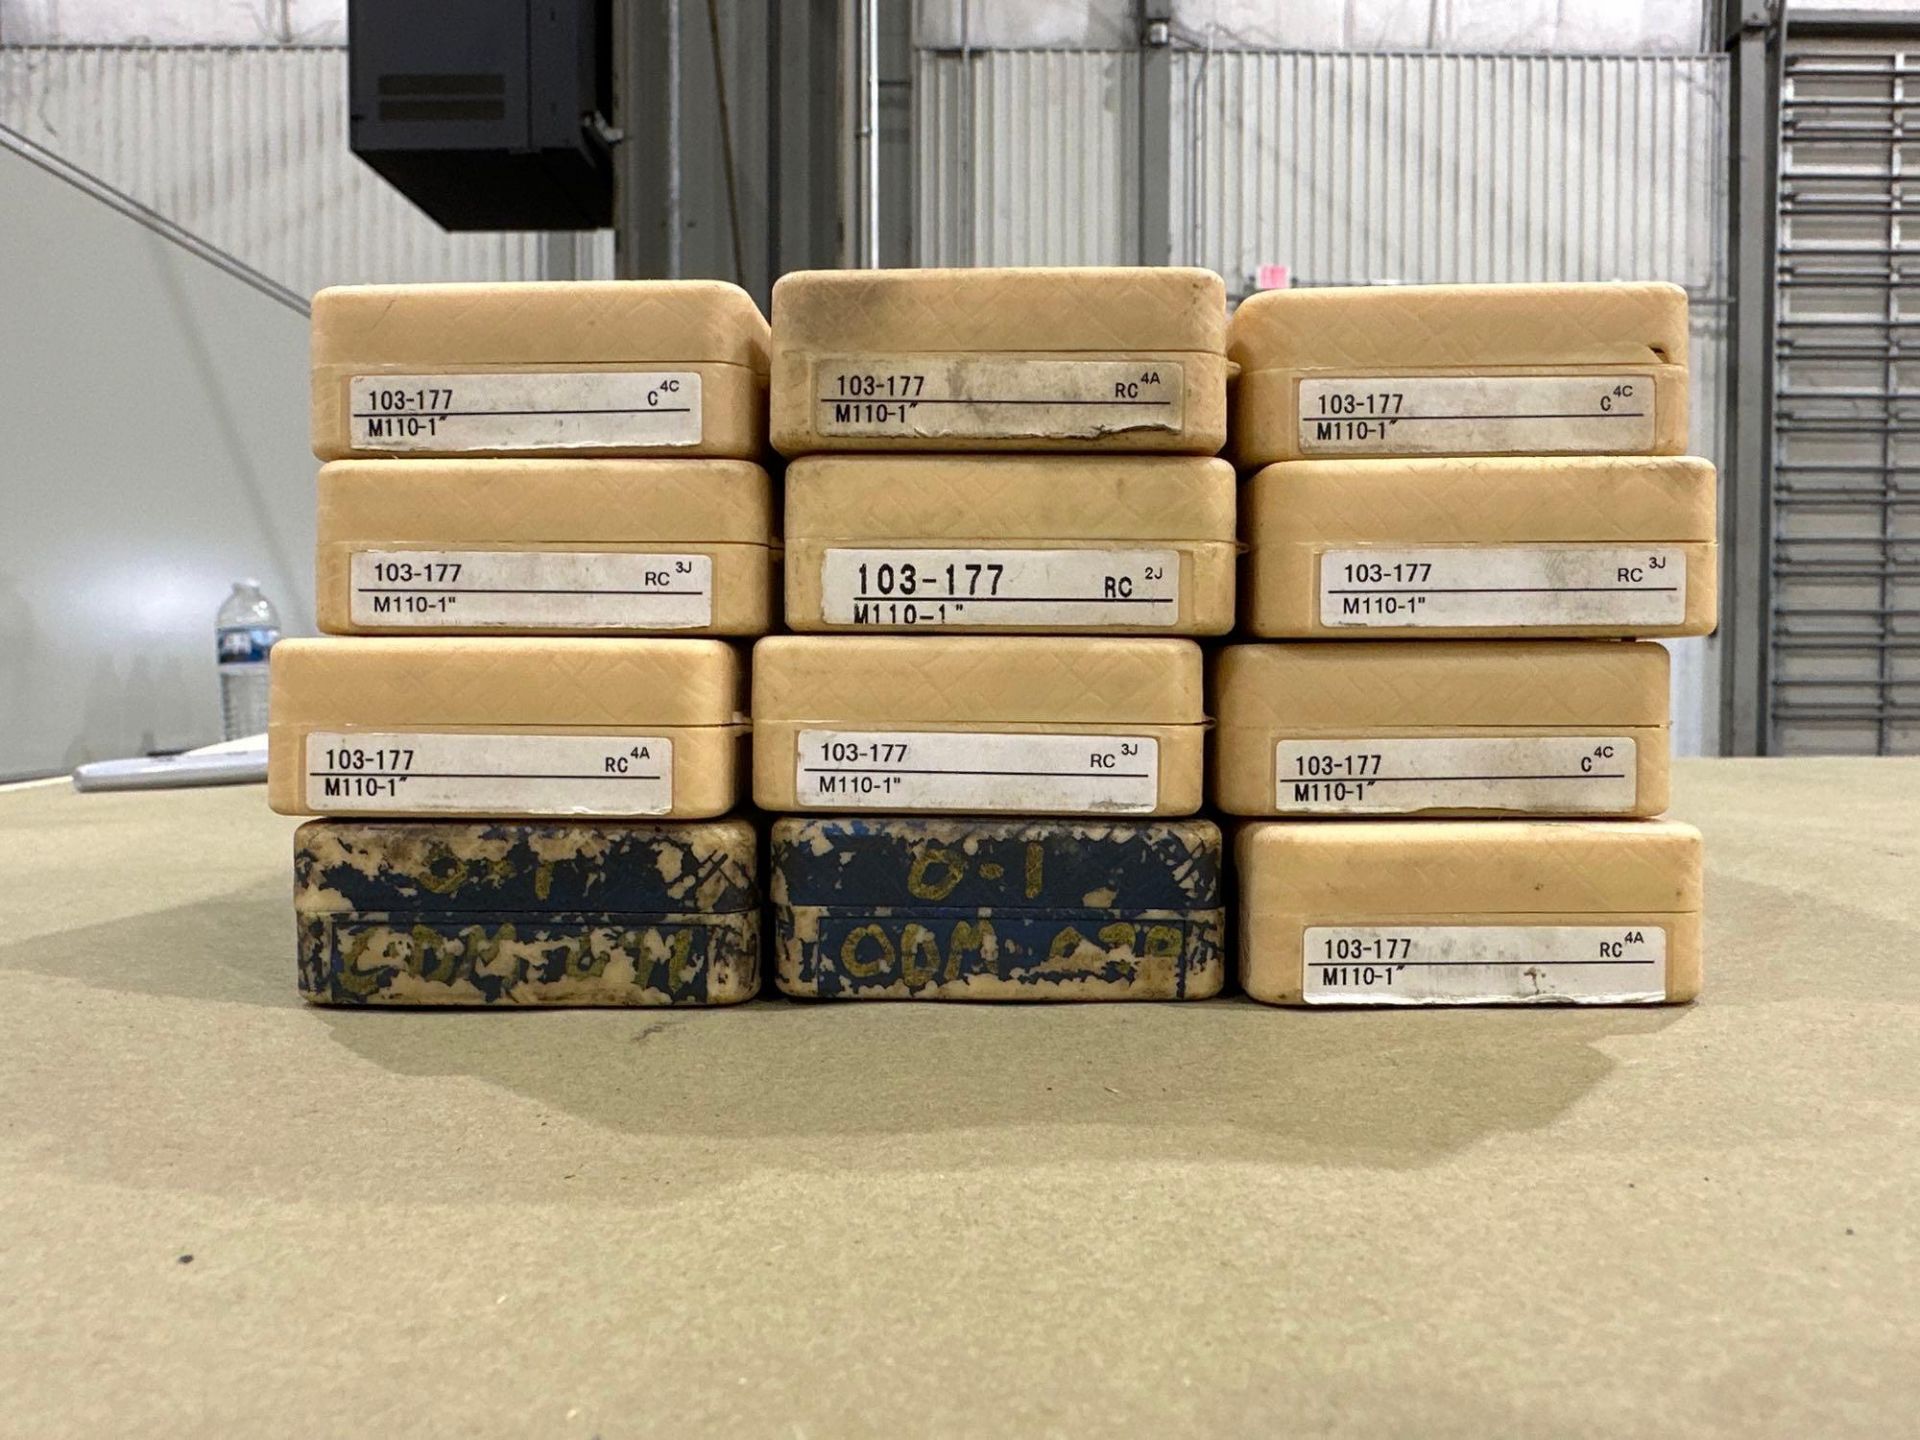 Lot of 12: Mitutoyo Mechanical OD Micrometer M110-1”, 0-1” Range, .001” Graduation, in plastic boxes - Image 3 of 6